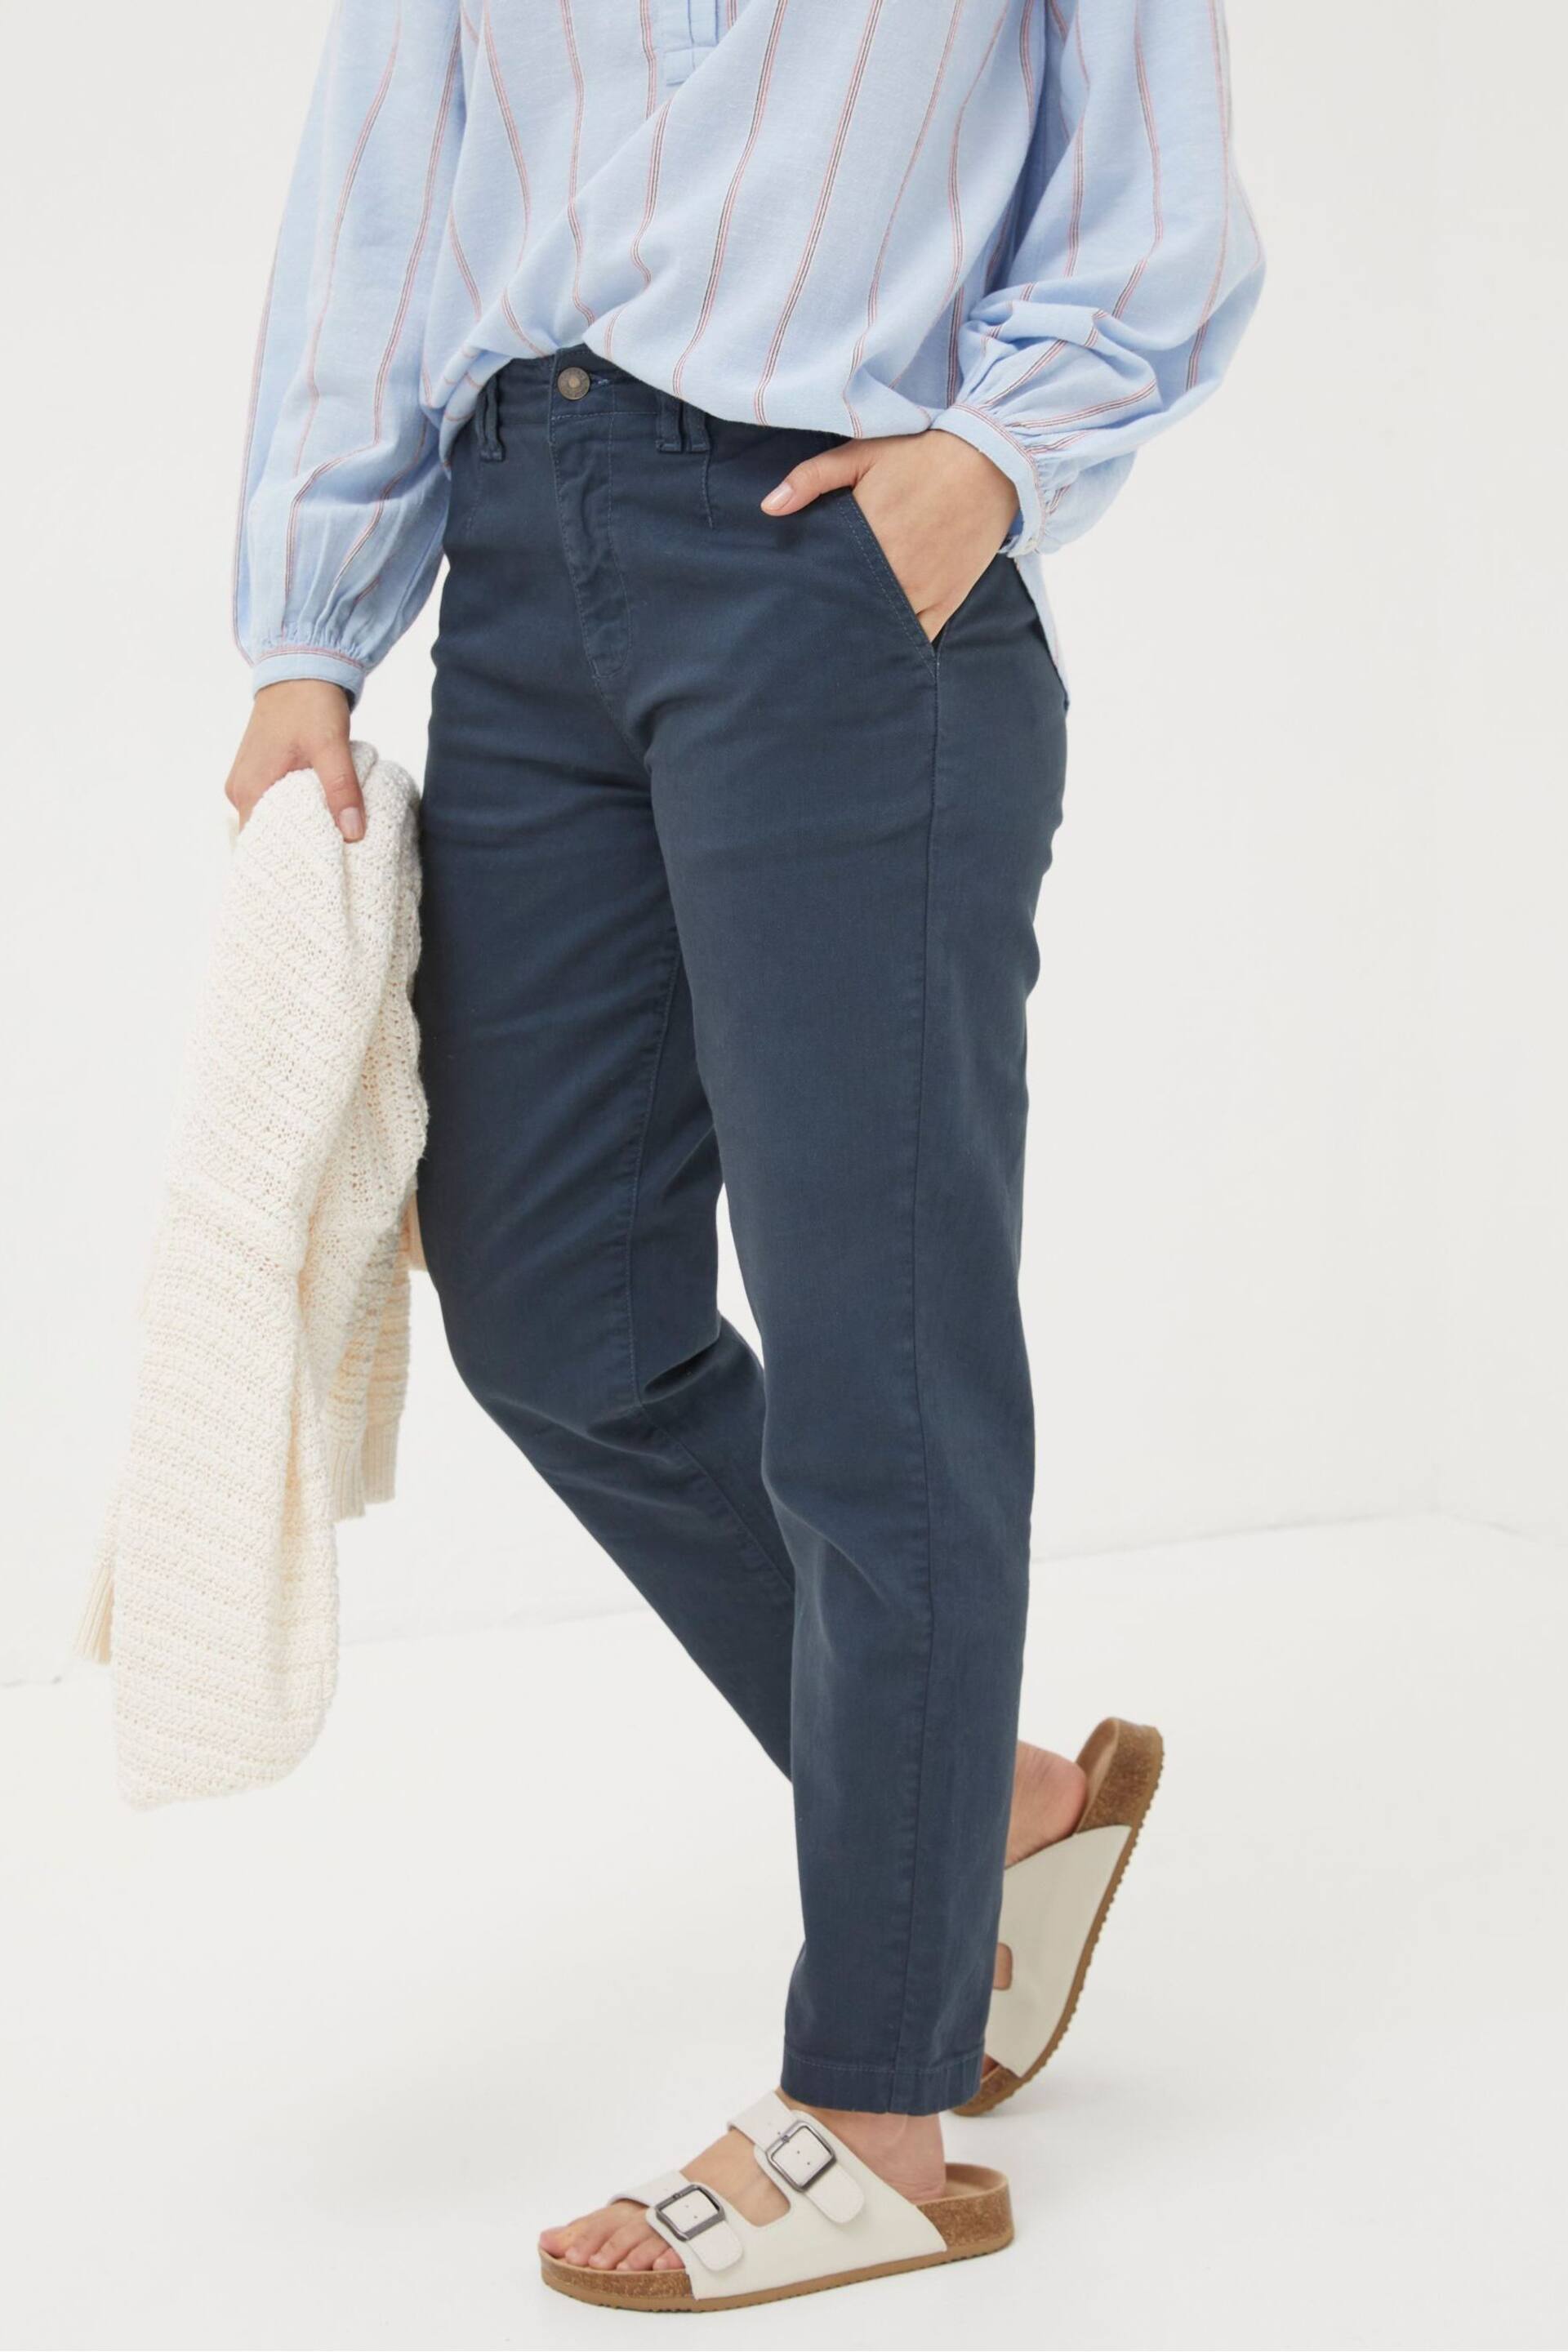 FatFace Blue Aspen Chino Trousers - Image 1 of 5